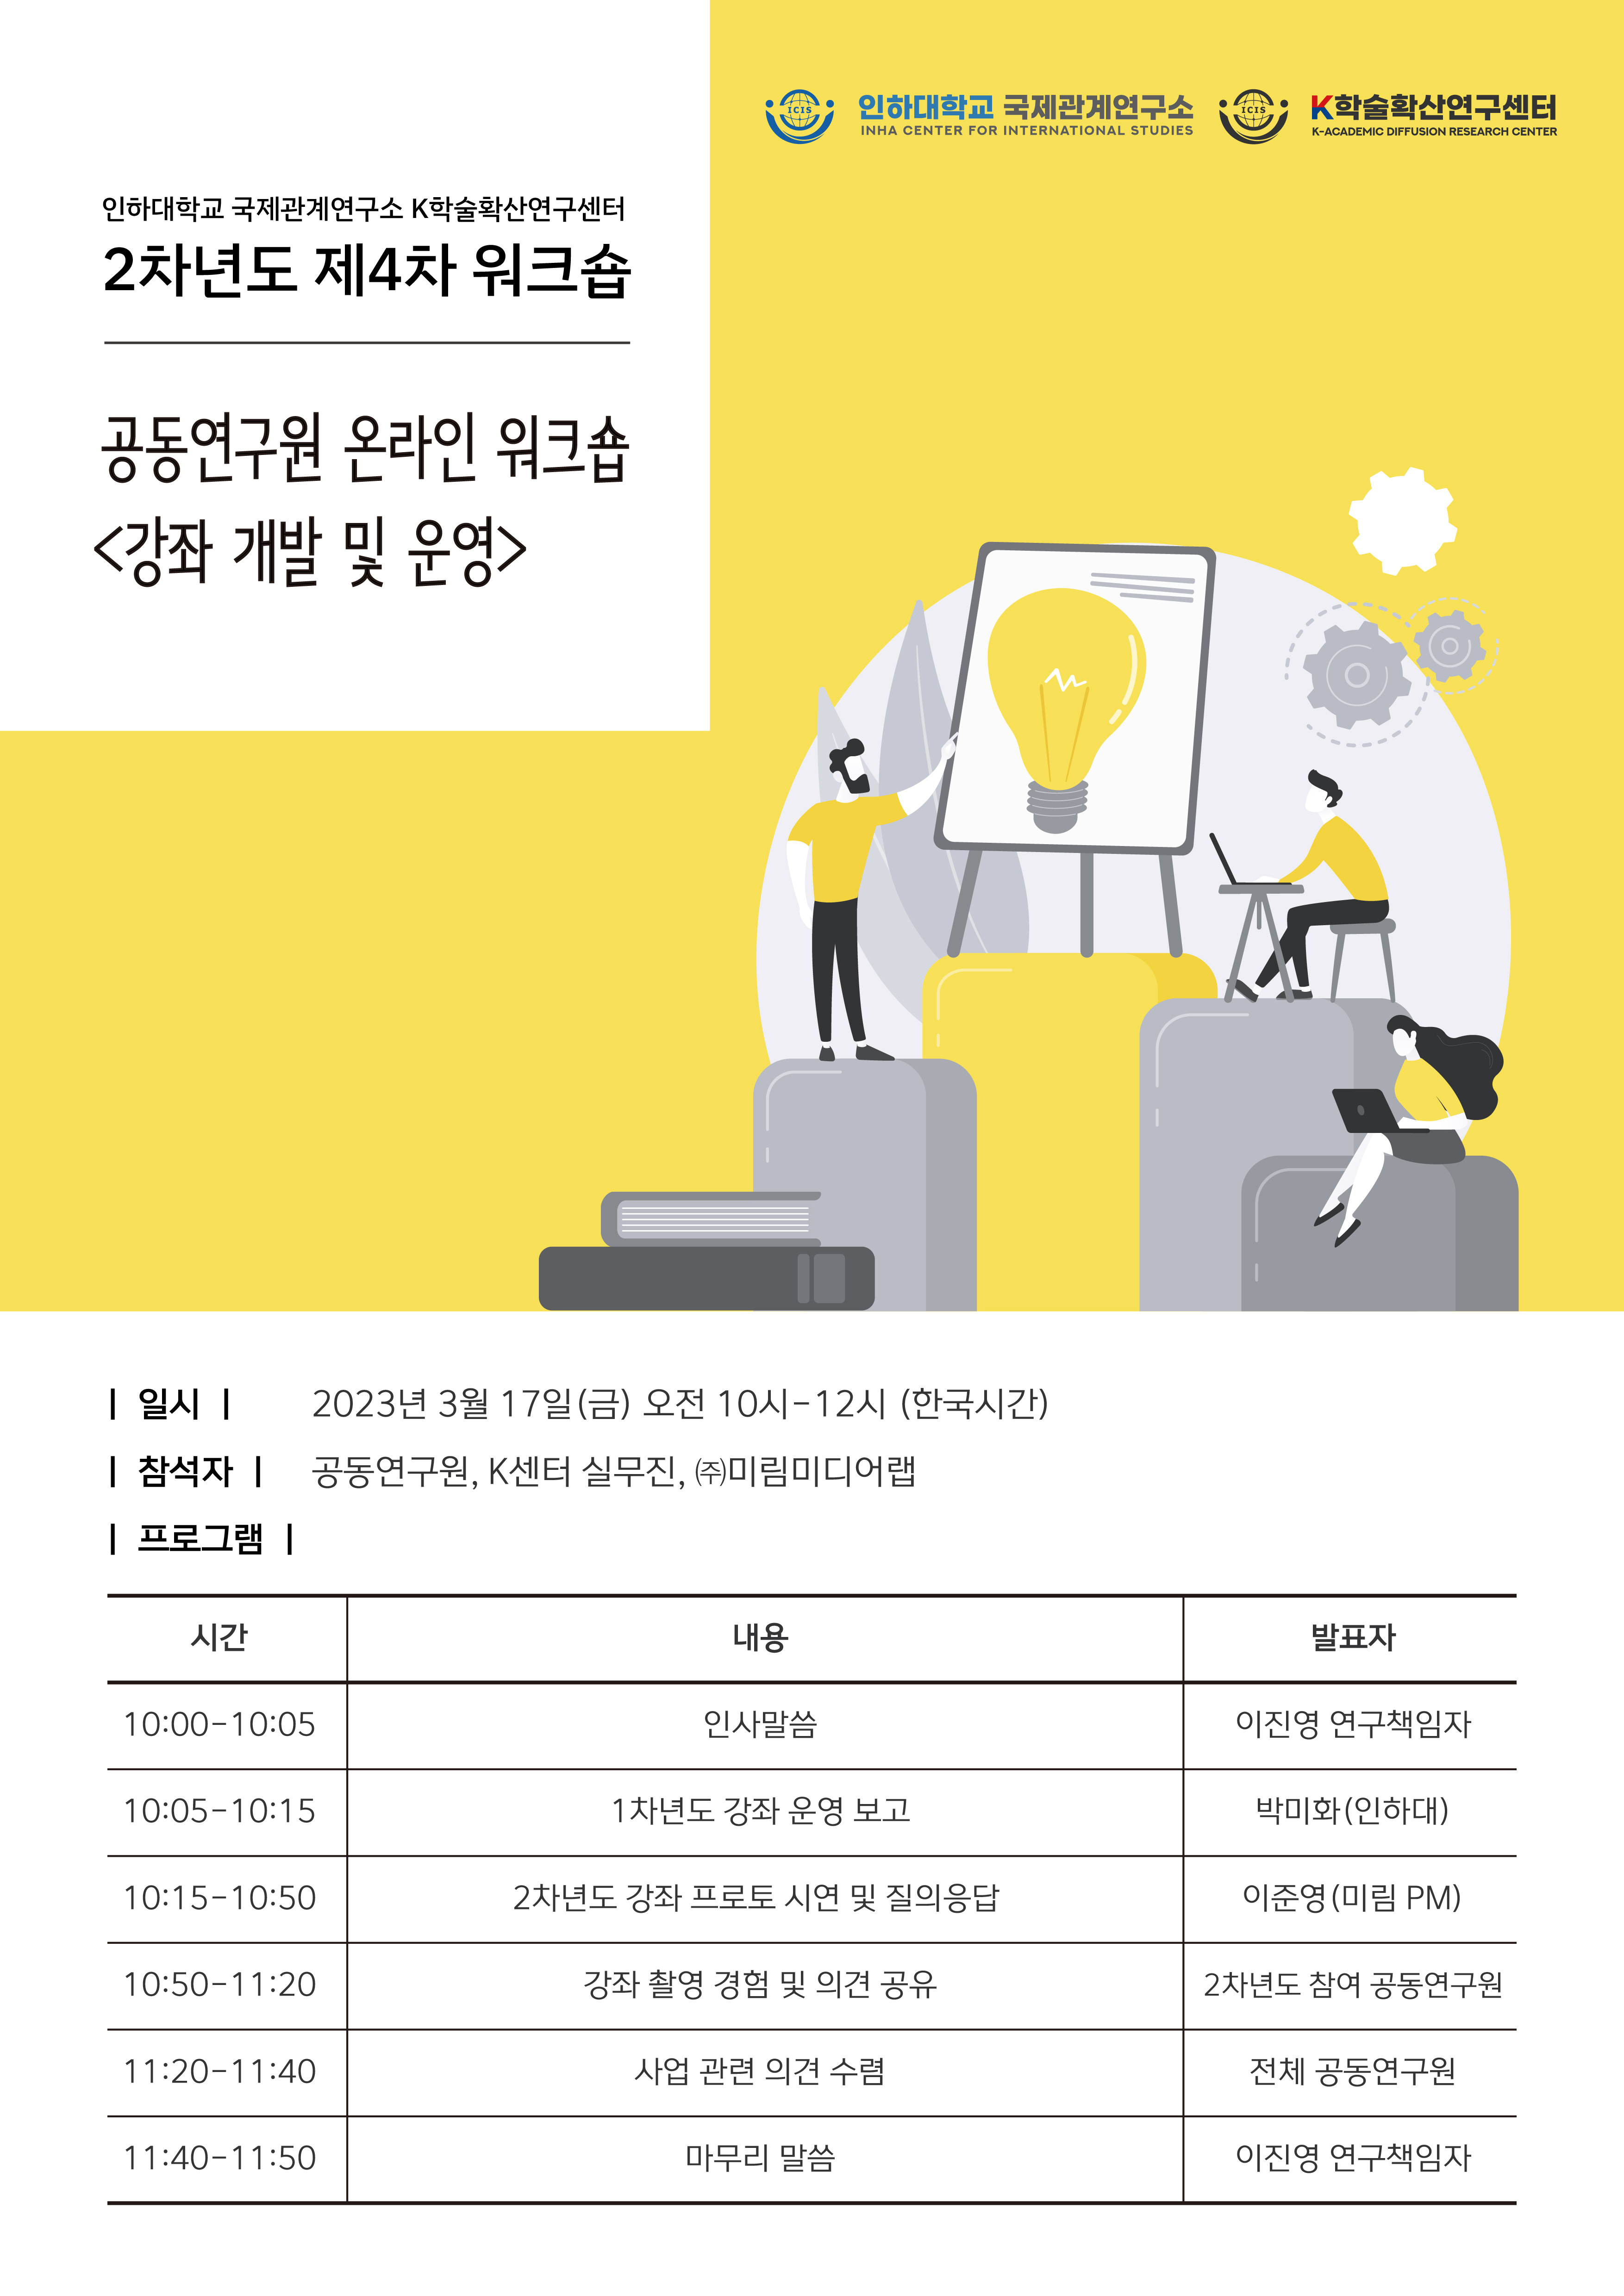 Joint Researcher Workshop on Online Course Development and Operation                                 썸네일